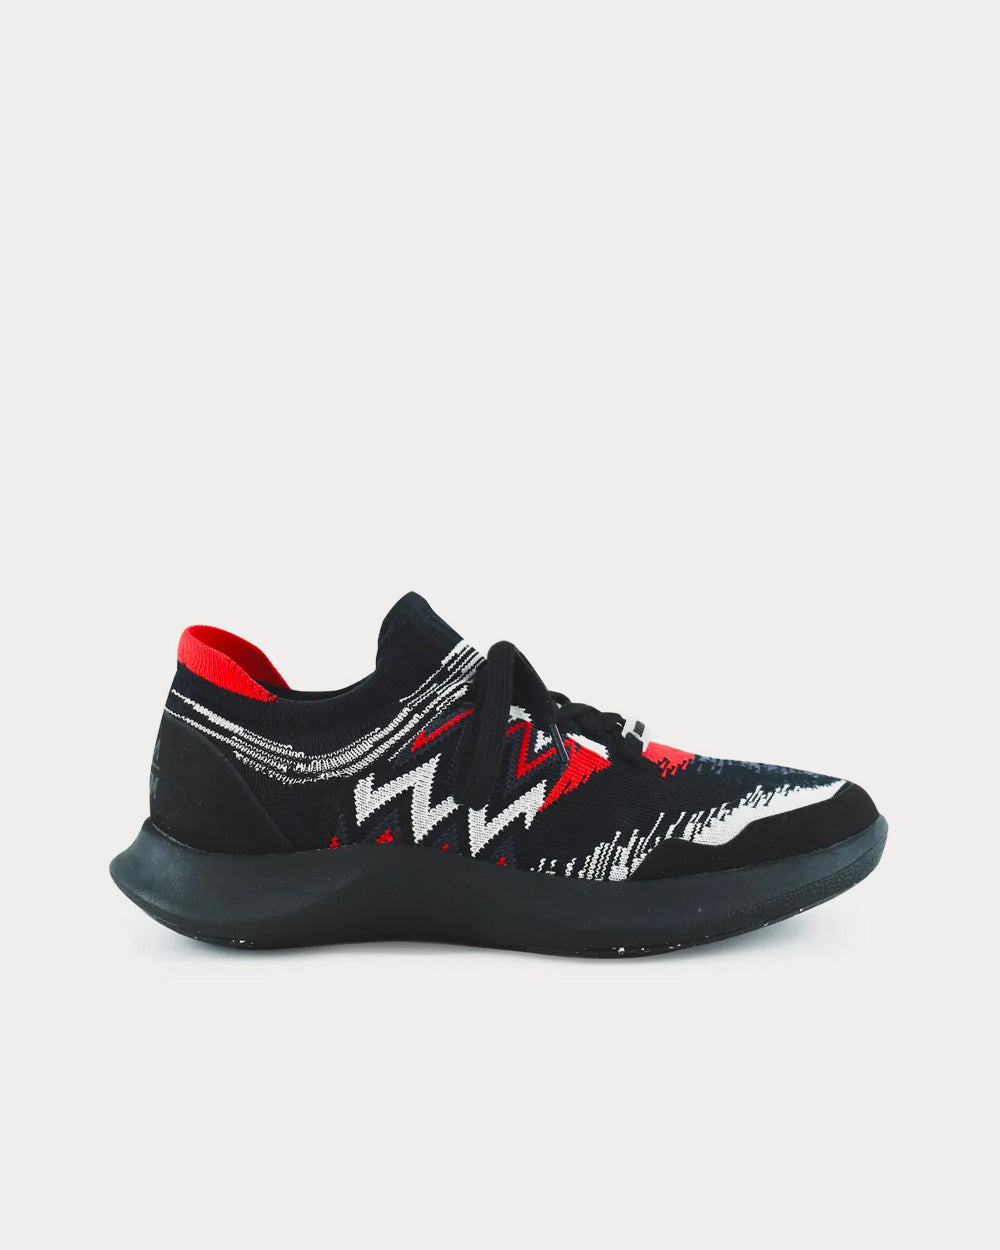 Missoni x ACBC - Fly Red / Black Low Top Sneakers